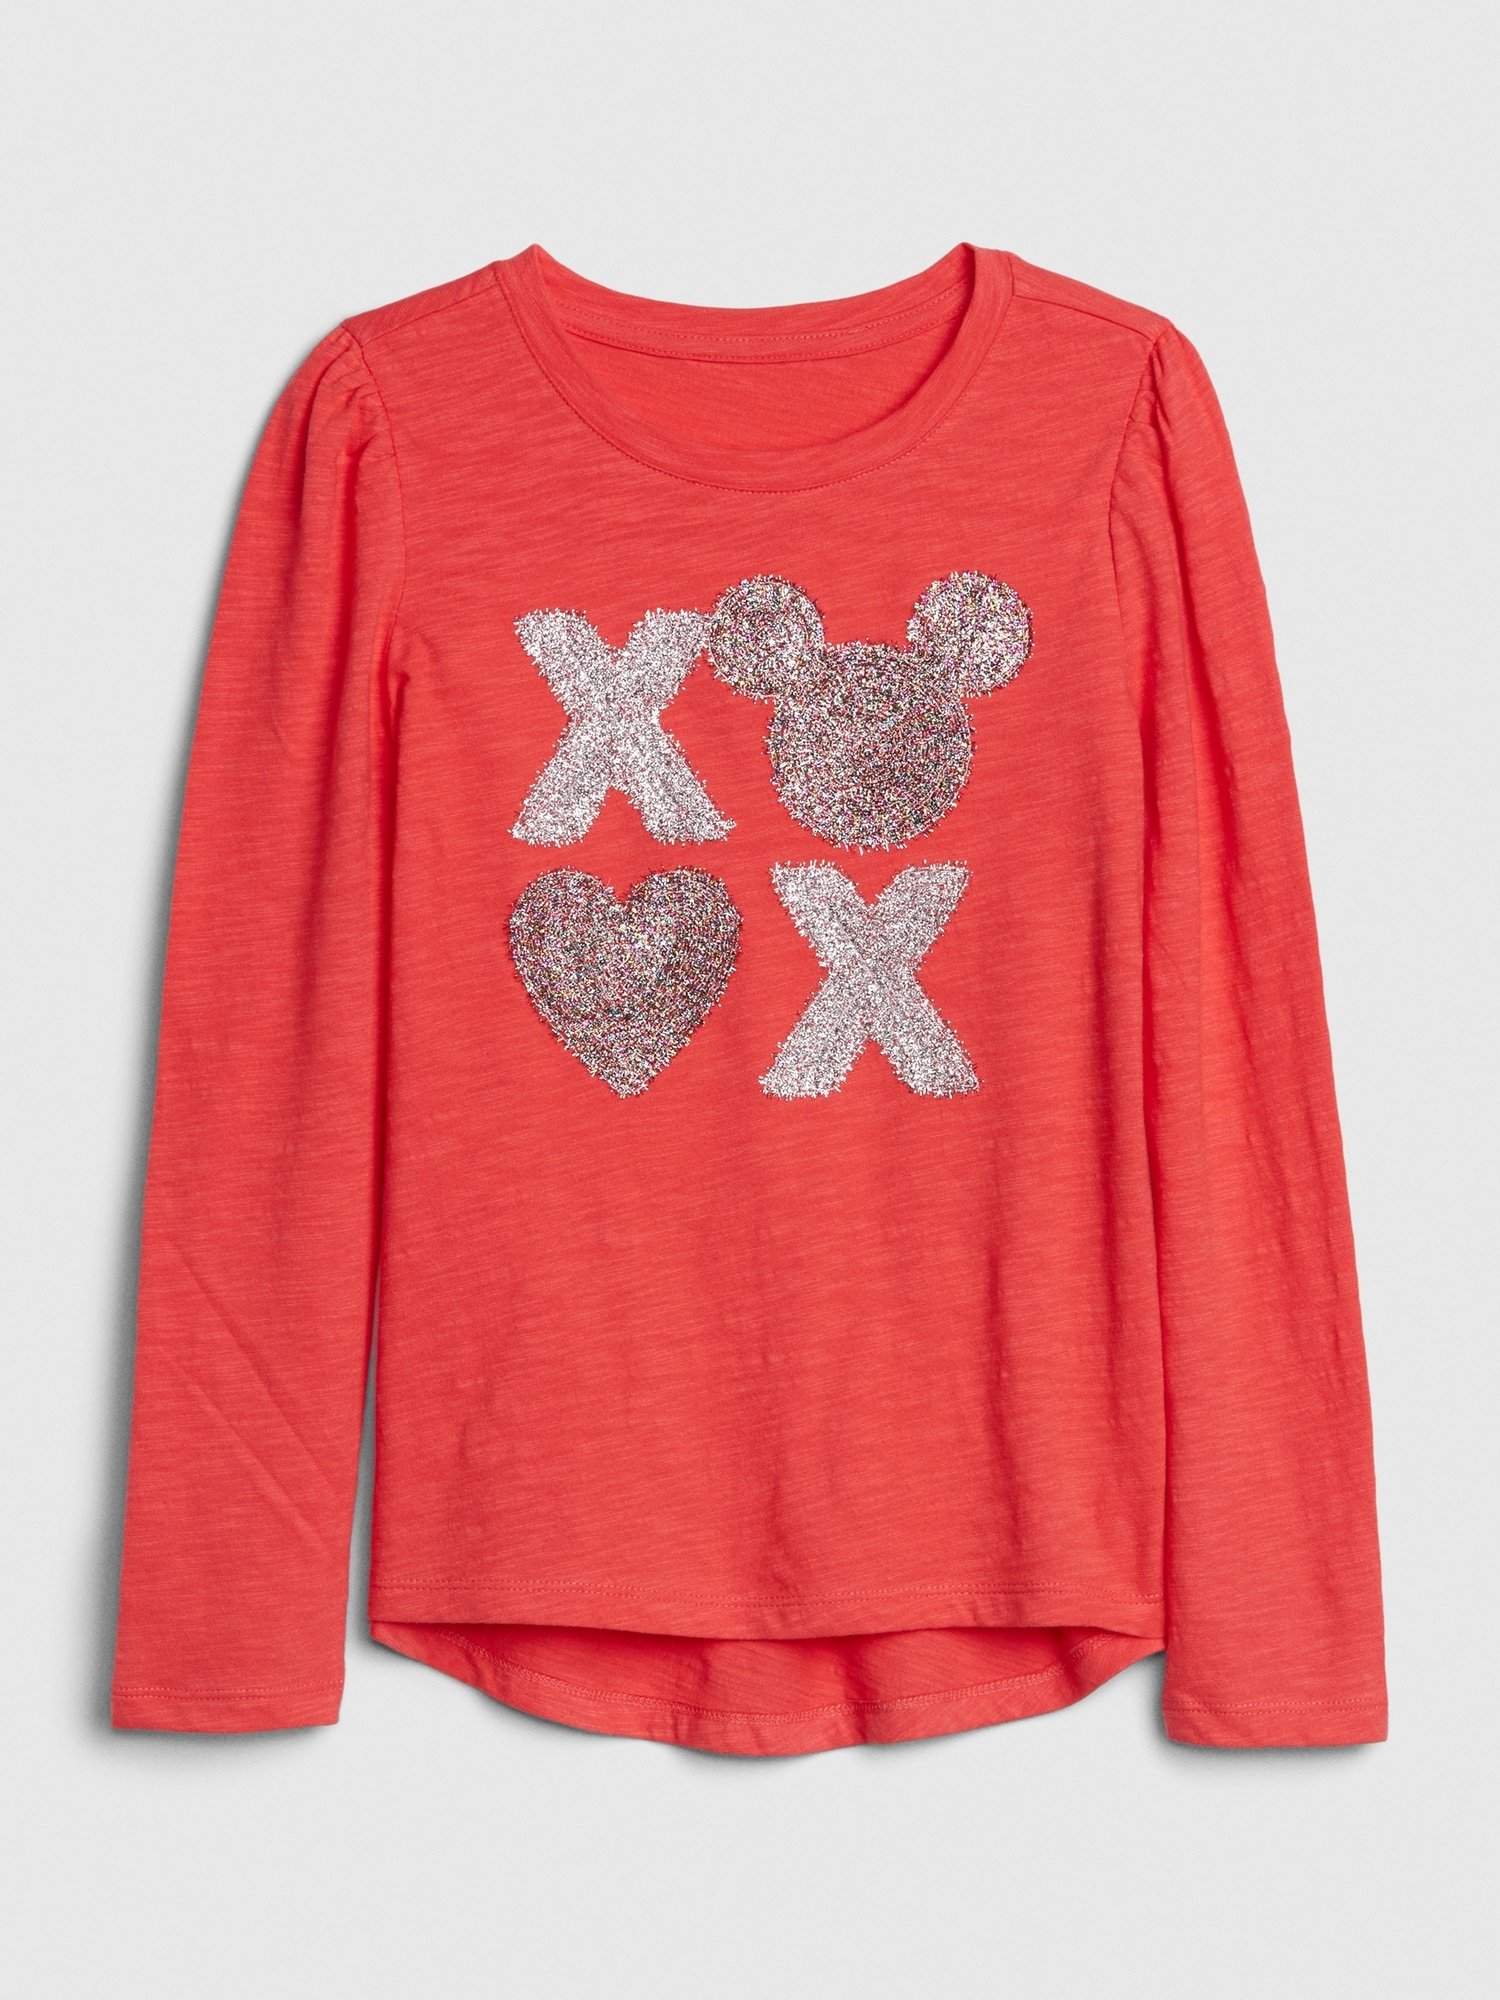 Disney Minnie Mouse and Mickey Mouse T-Shirt product image